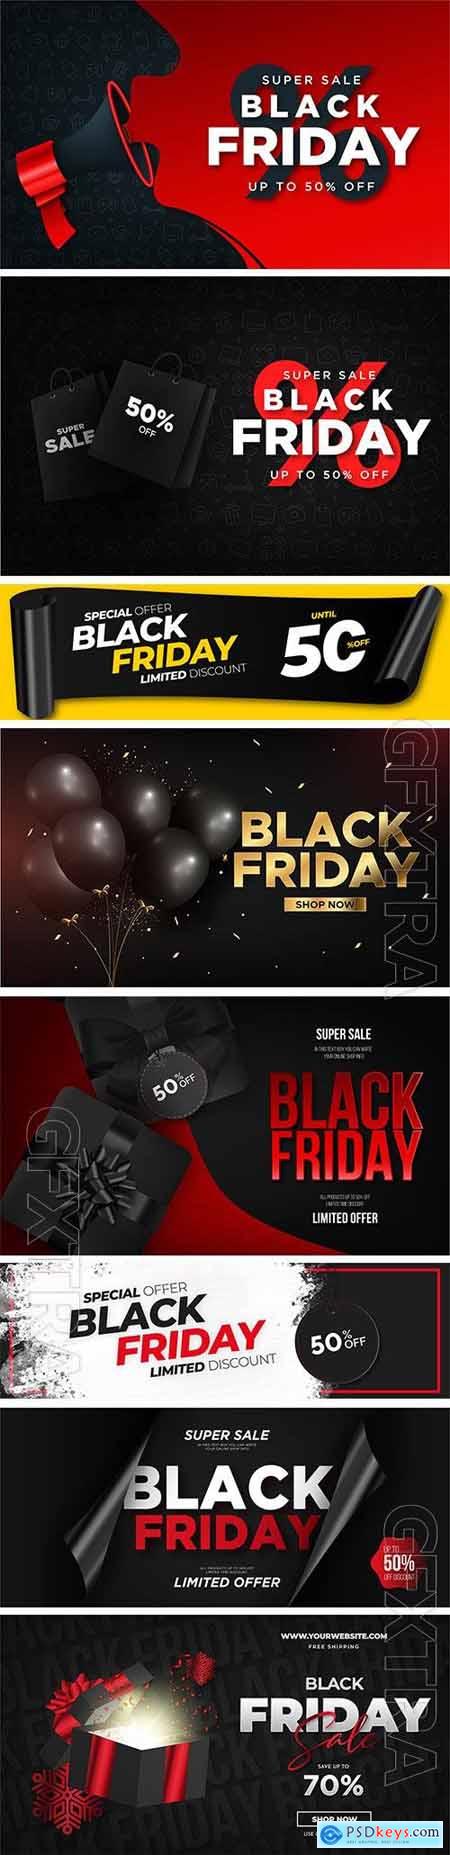 Black friday sale with 3d vector realistic elemens